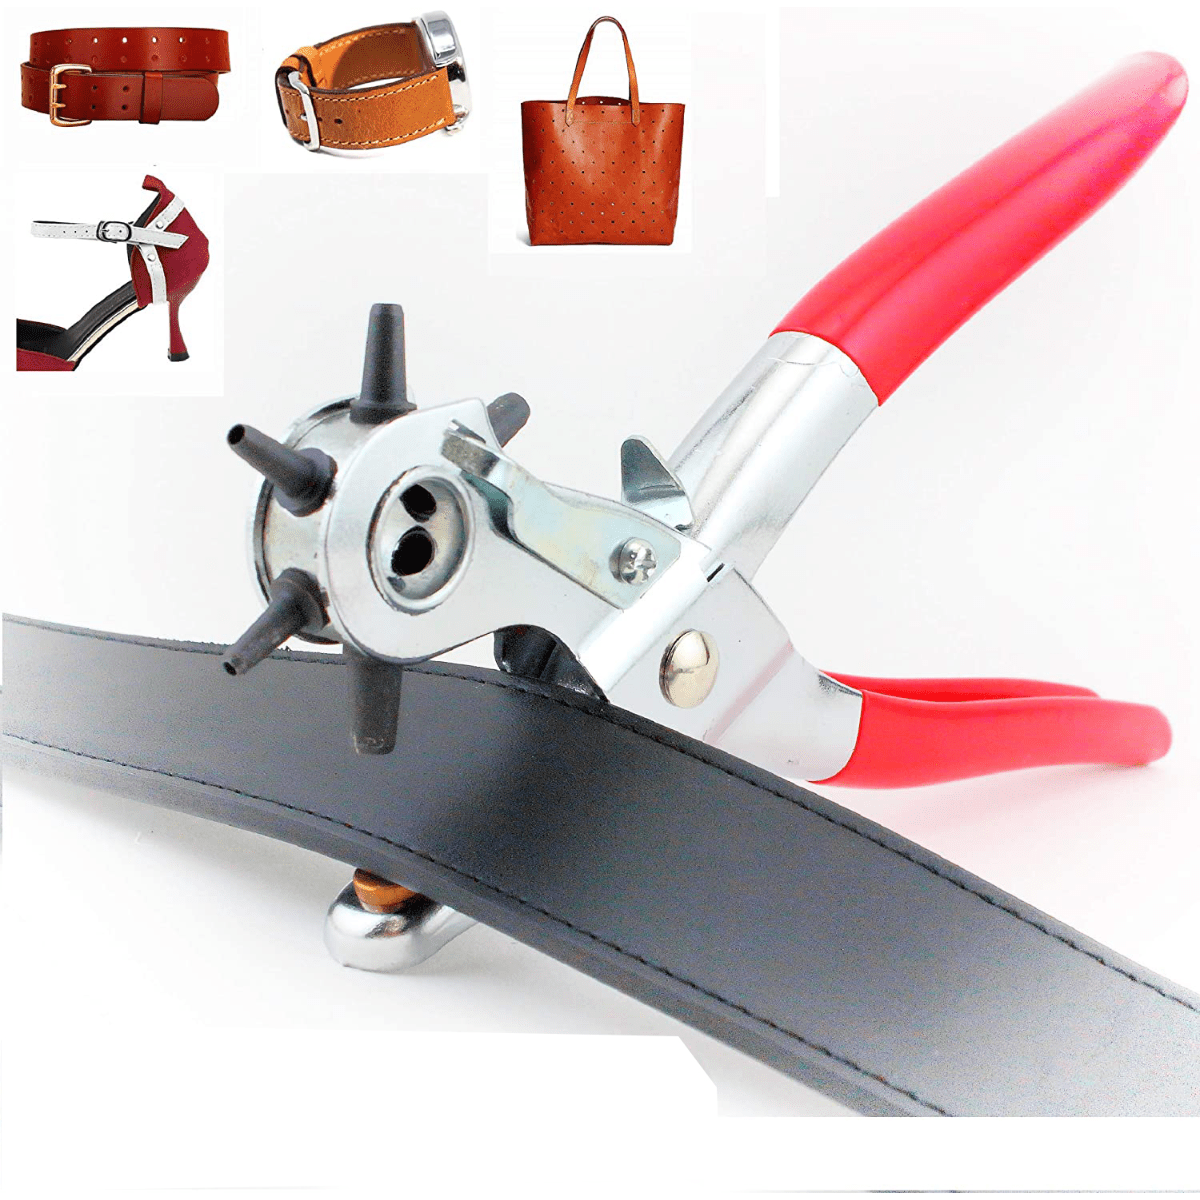 Leather Hole Punch Tool for Belt - Multi Hole Sizes Puncher for Belts,  Watch Bands, Straps, Dog Collars, Saddles, Shoes, Fabric, DIY Home or Craft  Projects - with 5/32 Grommet Eyelet Kit